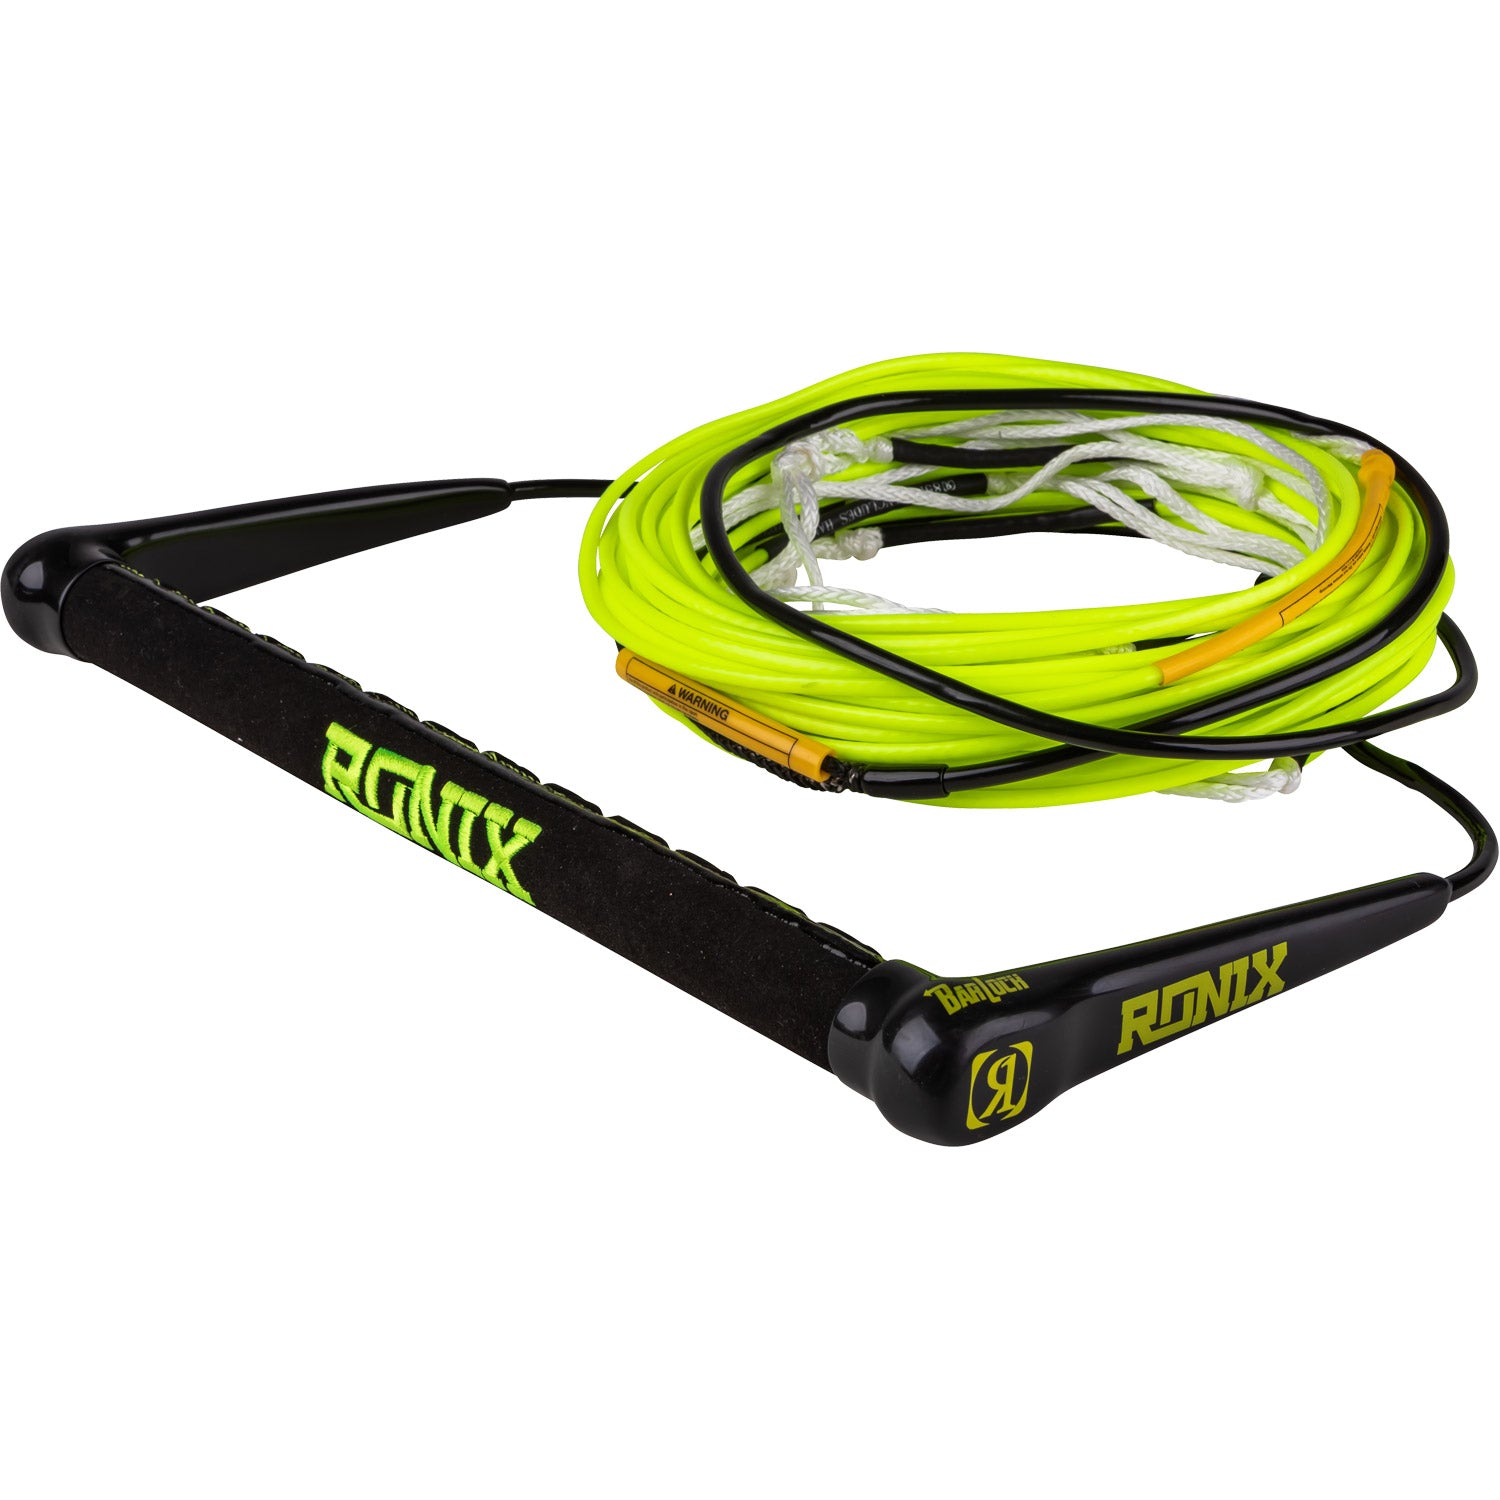 Combo 5.0 Wakeboard Rope Package